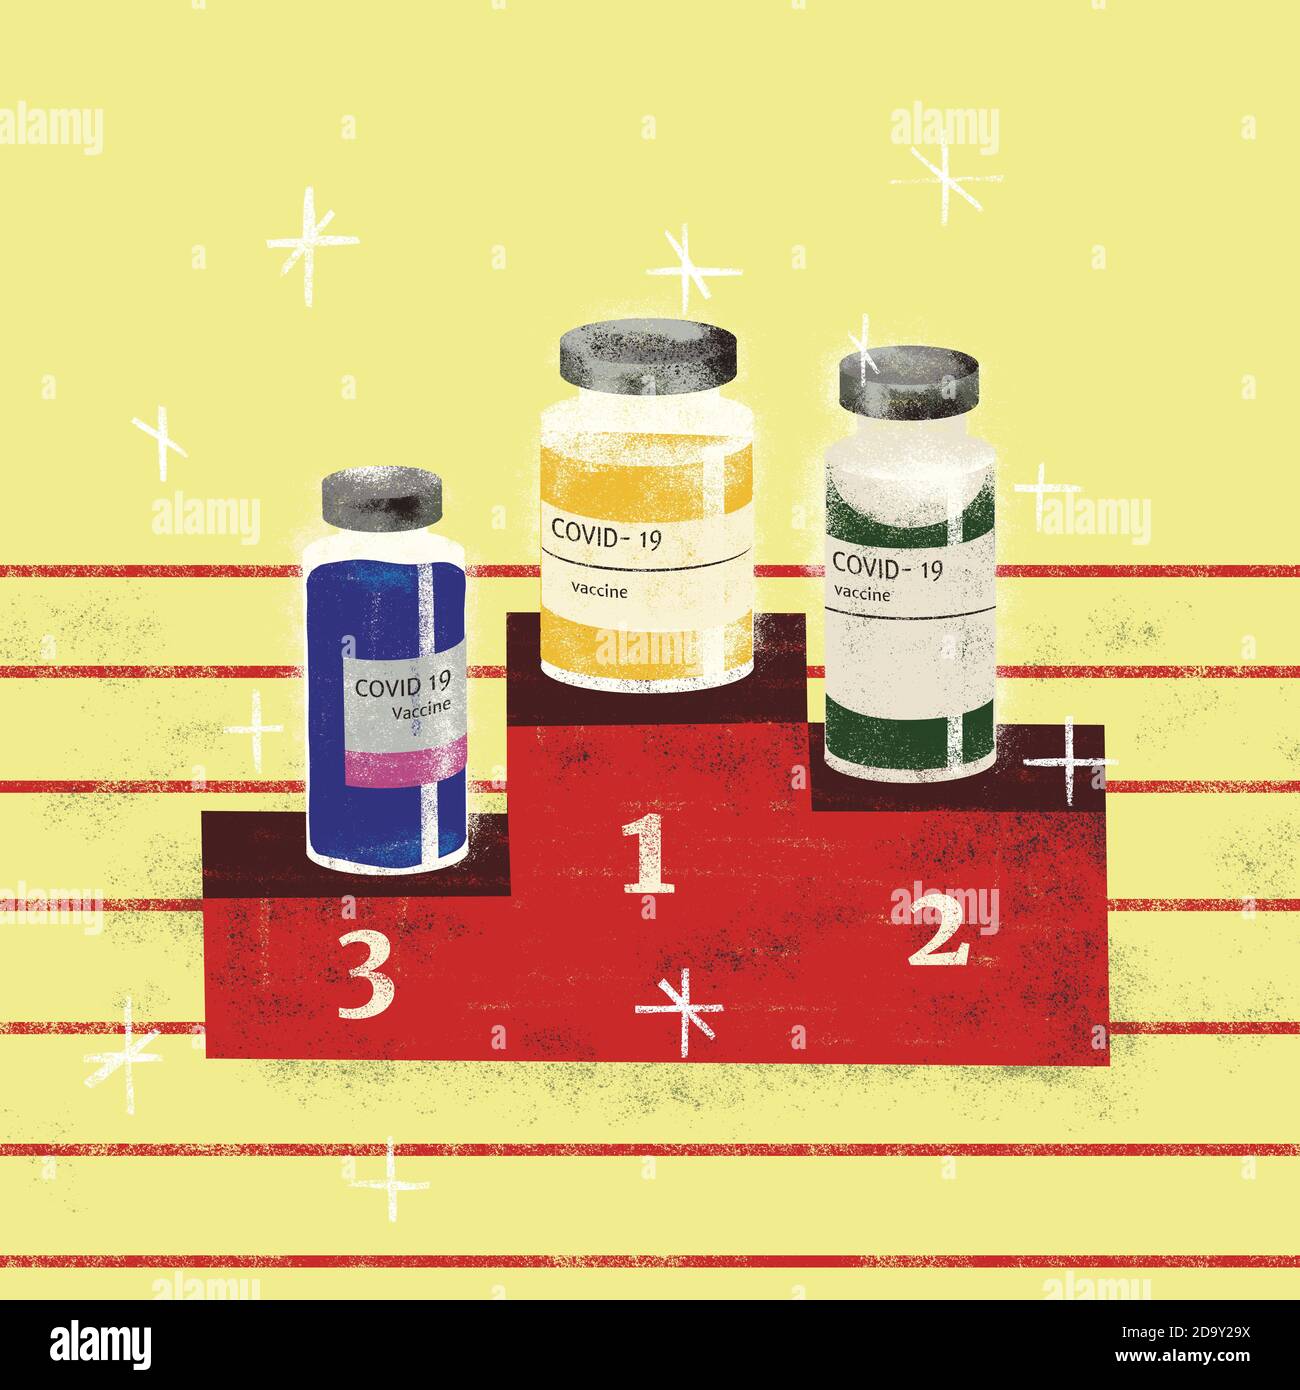 Race for a coronavirus Covid-19 vaccine. Health competition concept illustration like an Olympic podium. Stock Photo